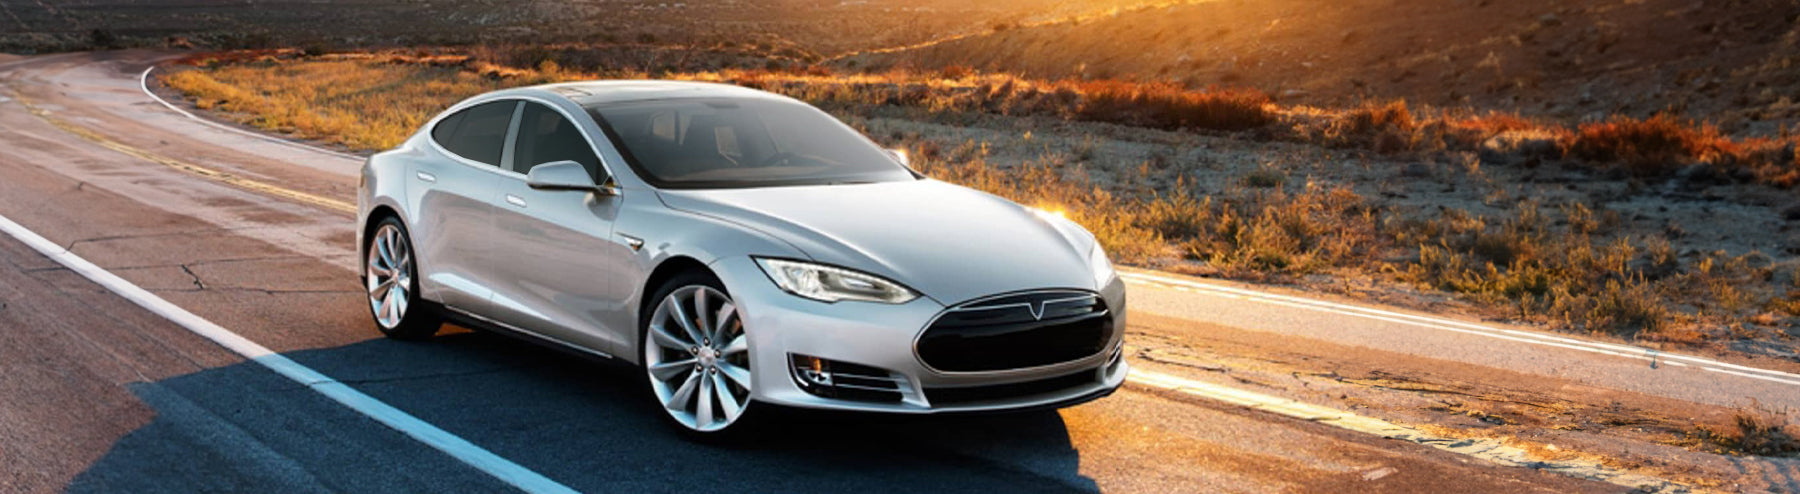 Tesla Model S electric car. A sleek, eco-friendly vehicle powered by electricity.